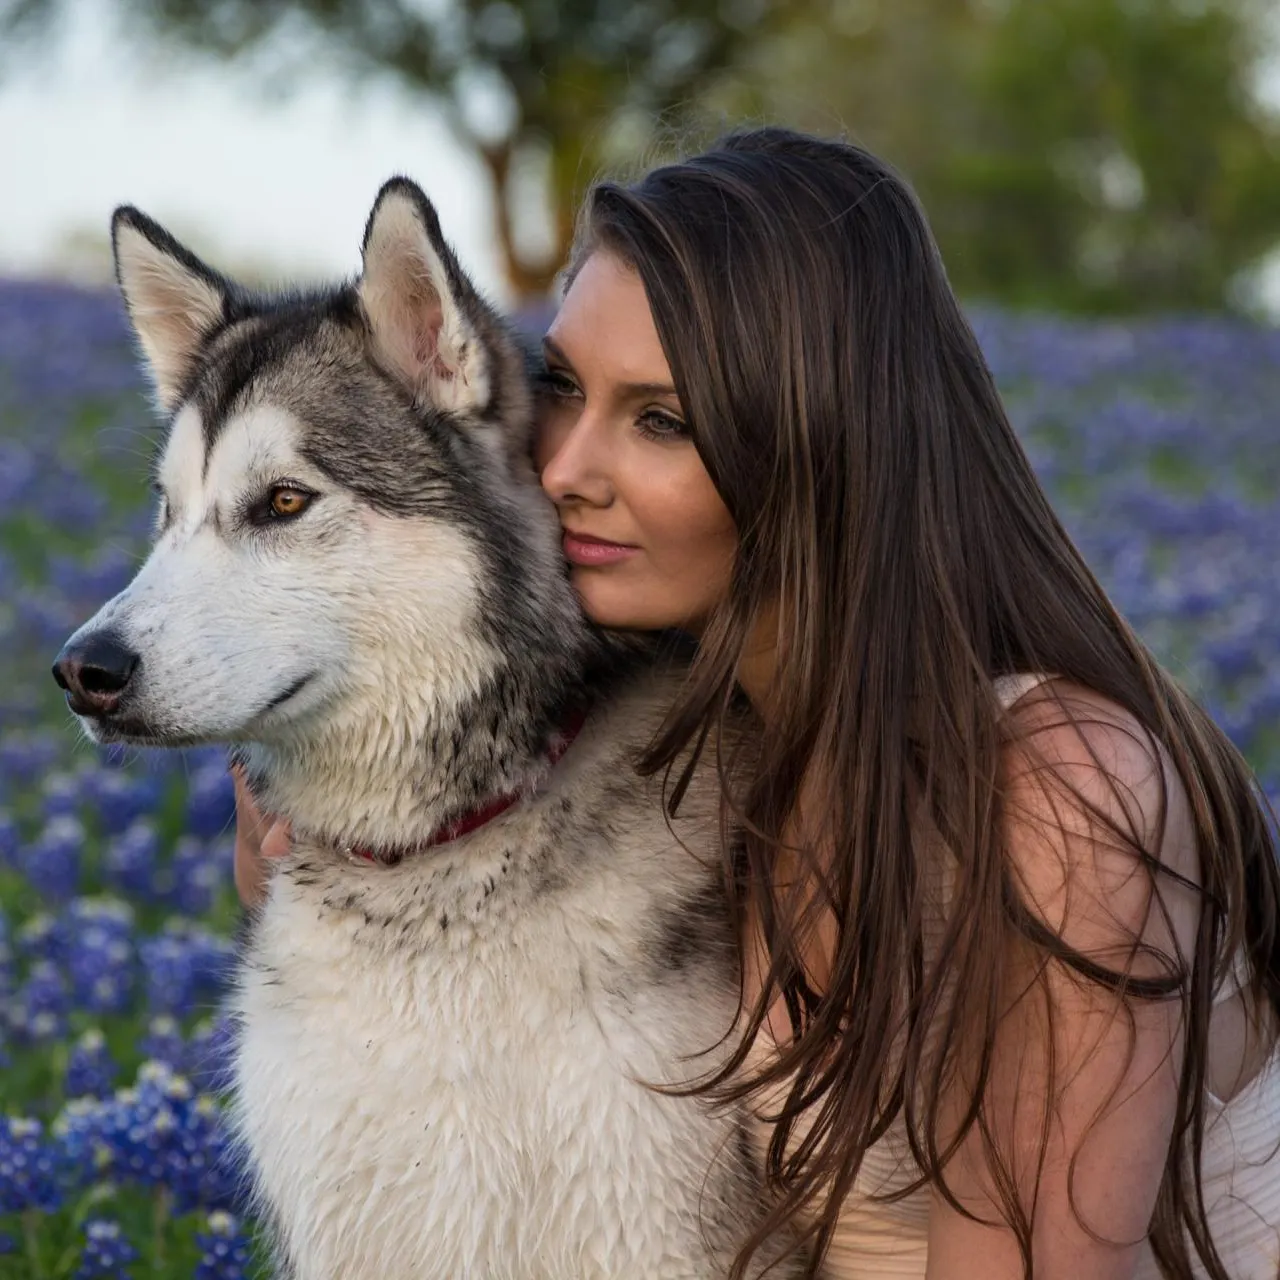 A woman and her husky sitting by purple flowers